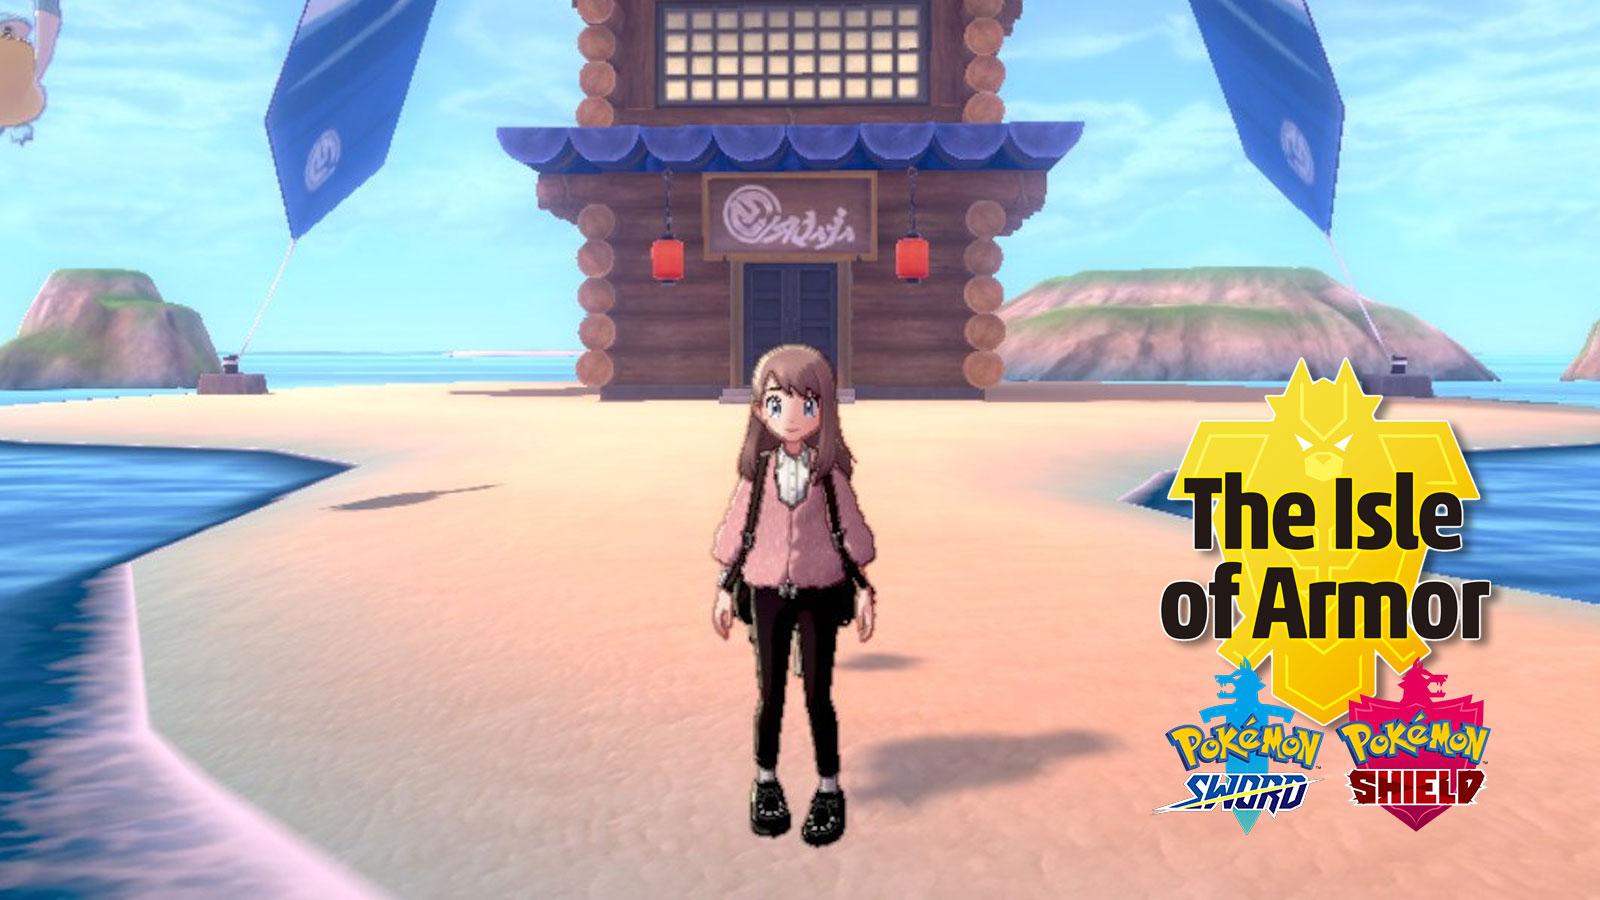 Pokemon Sword & Shield players stunned by Isle of Armor discovery